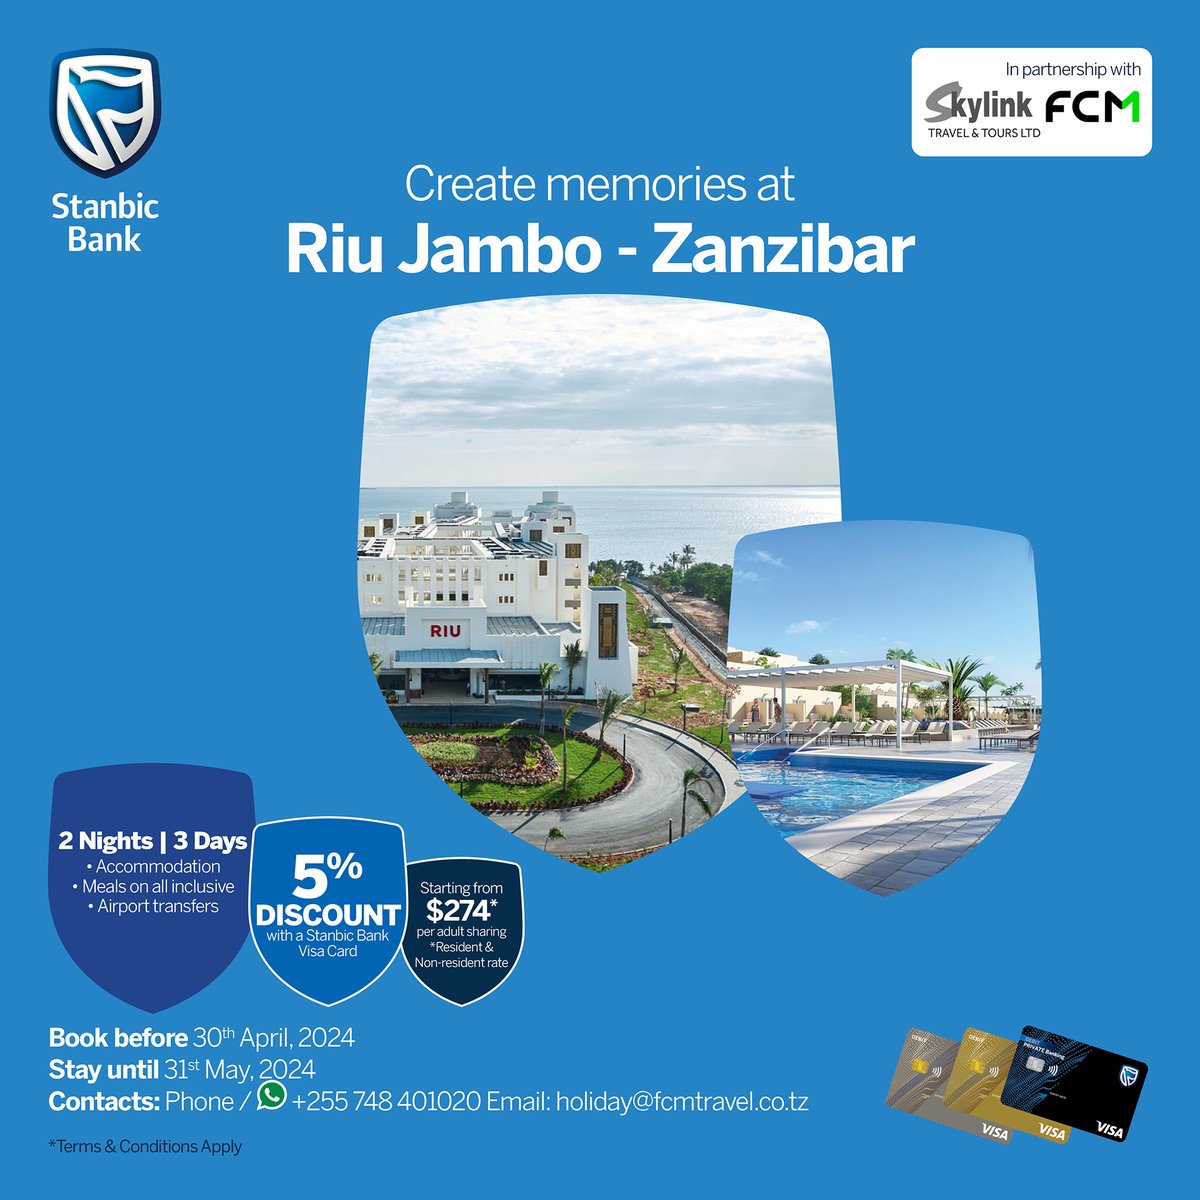 Explore local treasures with ease! Use your Stanbic Visa Card for discounts at various hotspots and enjoy a stress-free getaway.